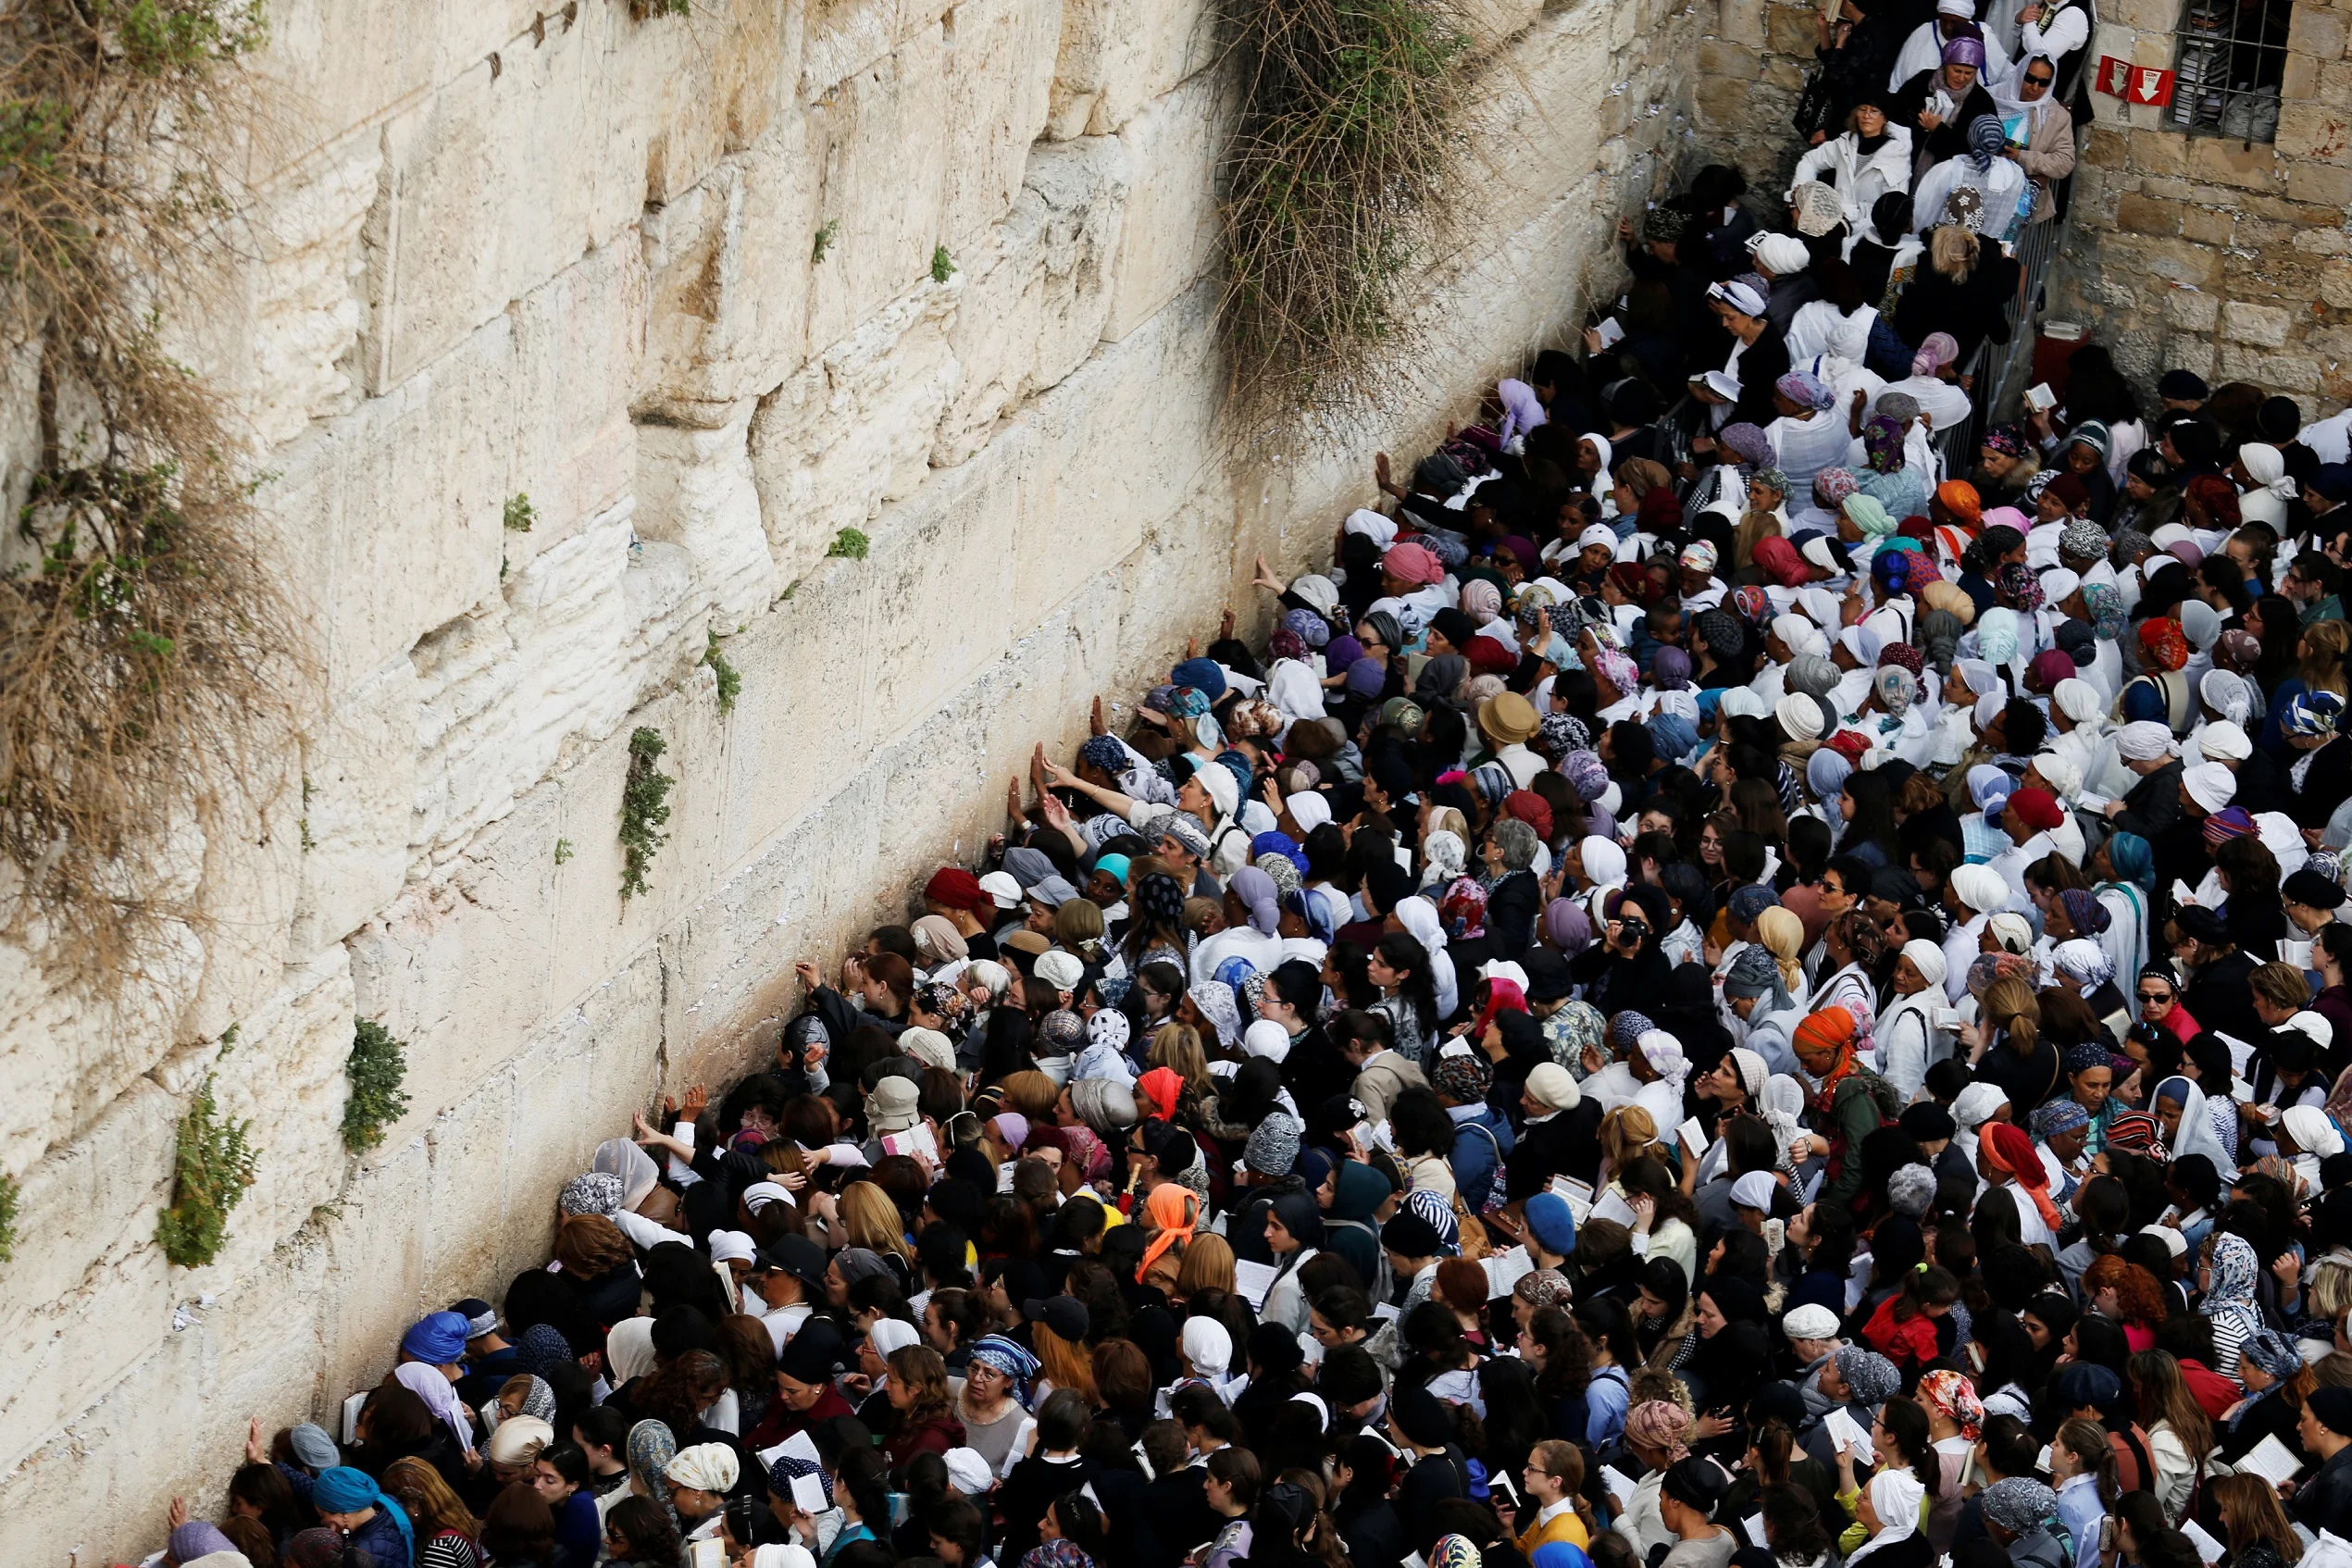 Jewish Worshippers Take Part In The Priestly Blessing Prayer On The Holiday Of Passover, At The Western Wall In Jerusalem's Old City